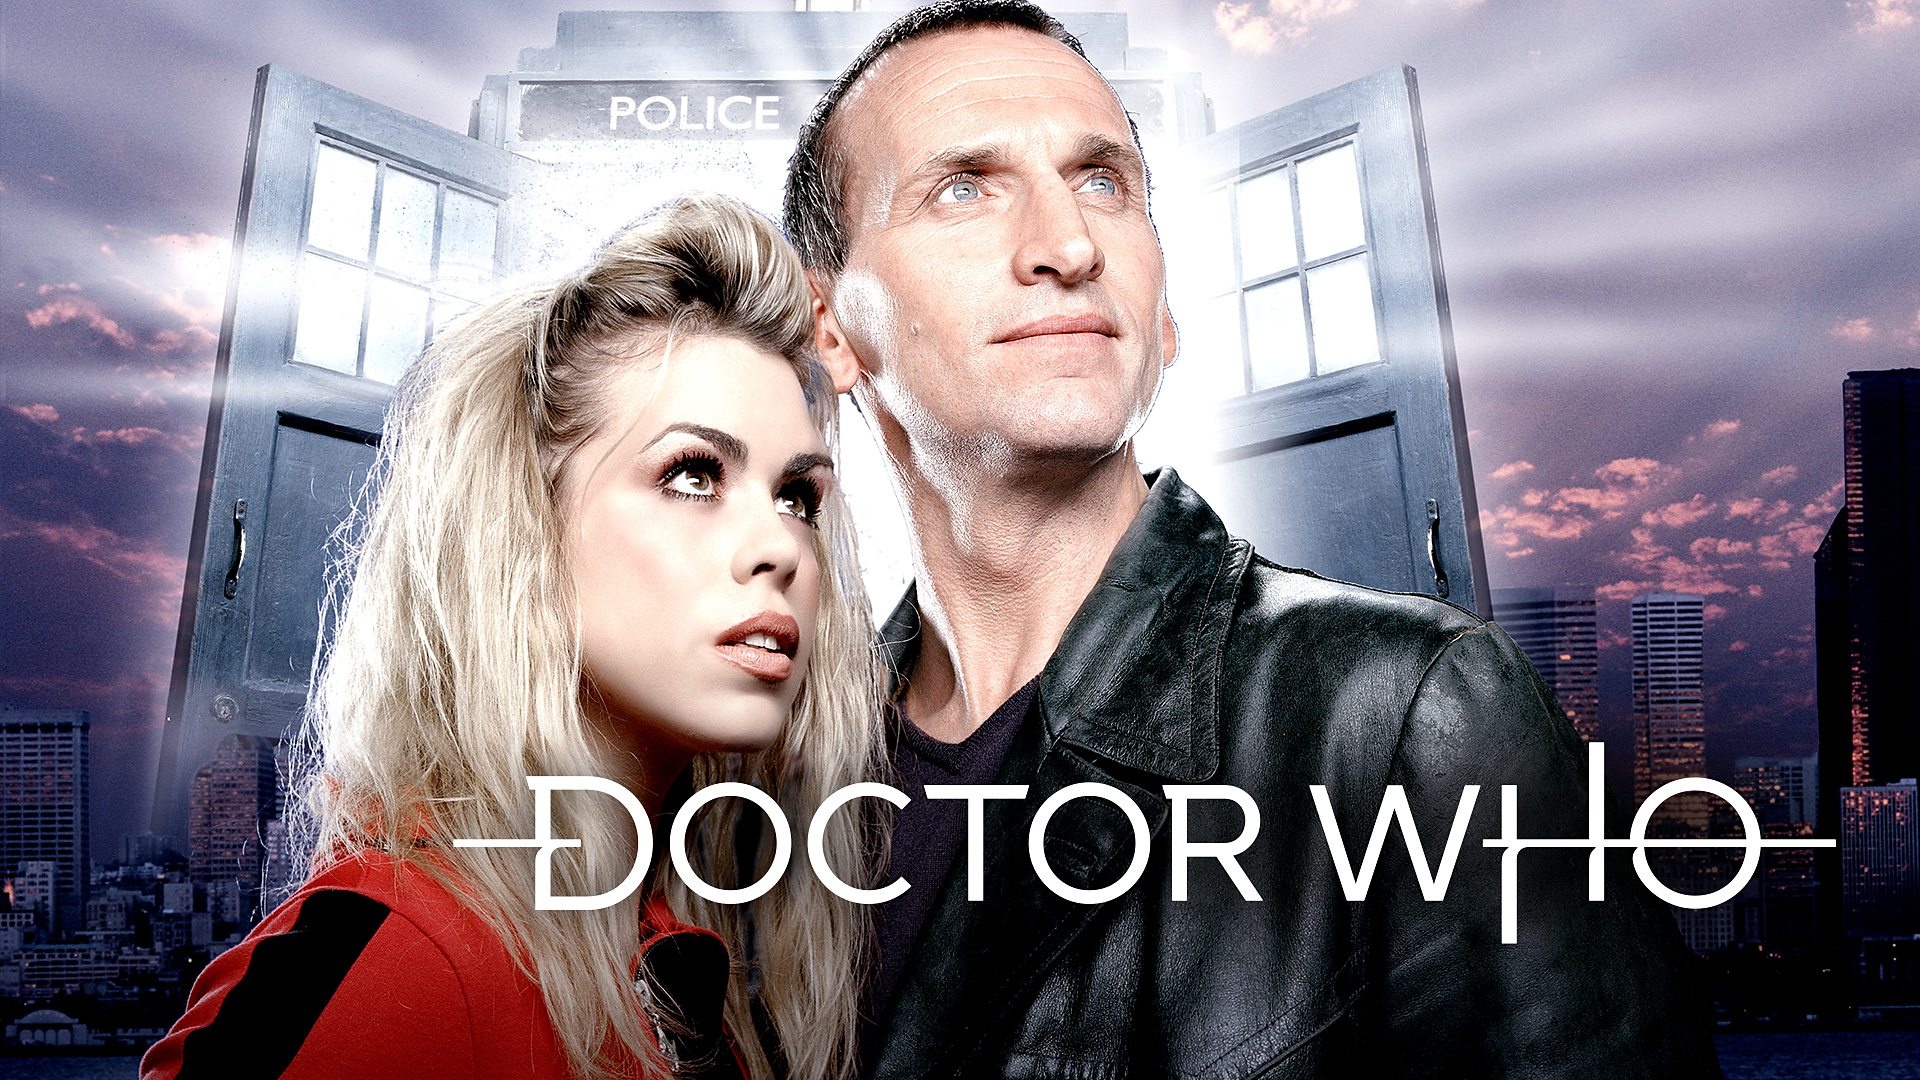 Doctor Who on demand, Christopher Eccleston's best episodes, Legal ways to stream, Digital availability, 1920x1080 Full HD Desktop